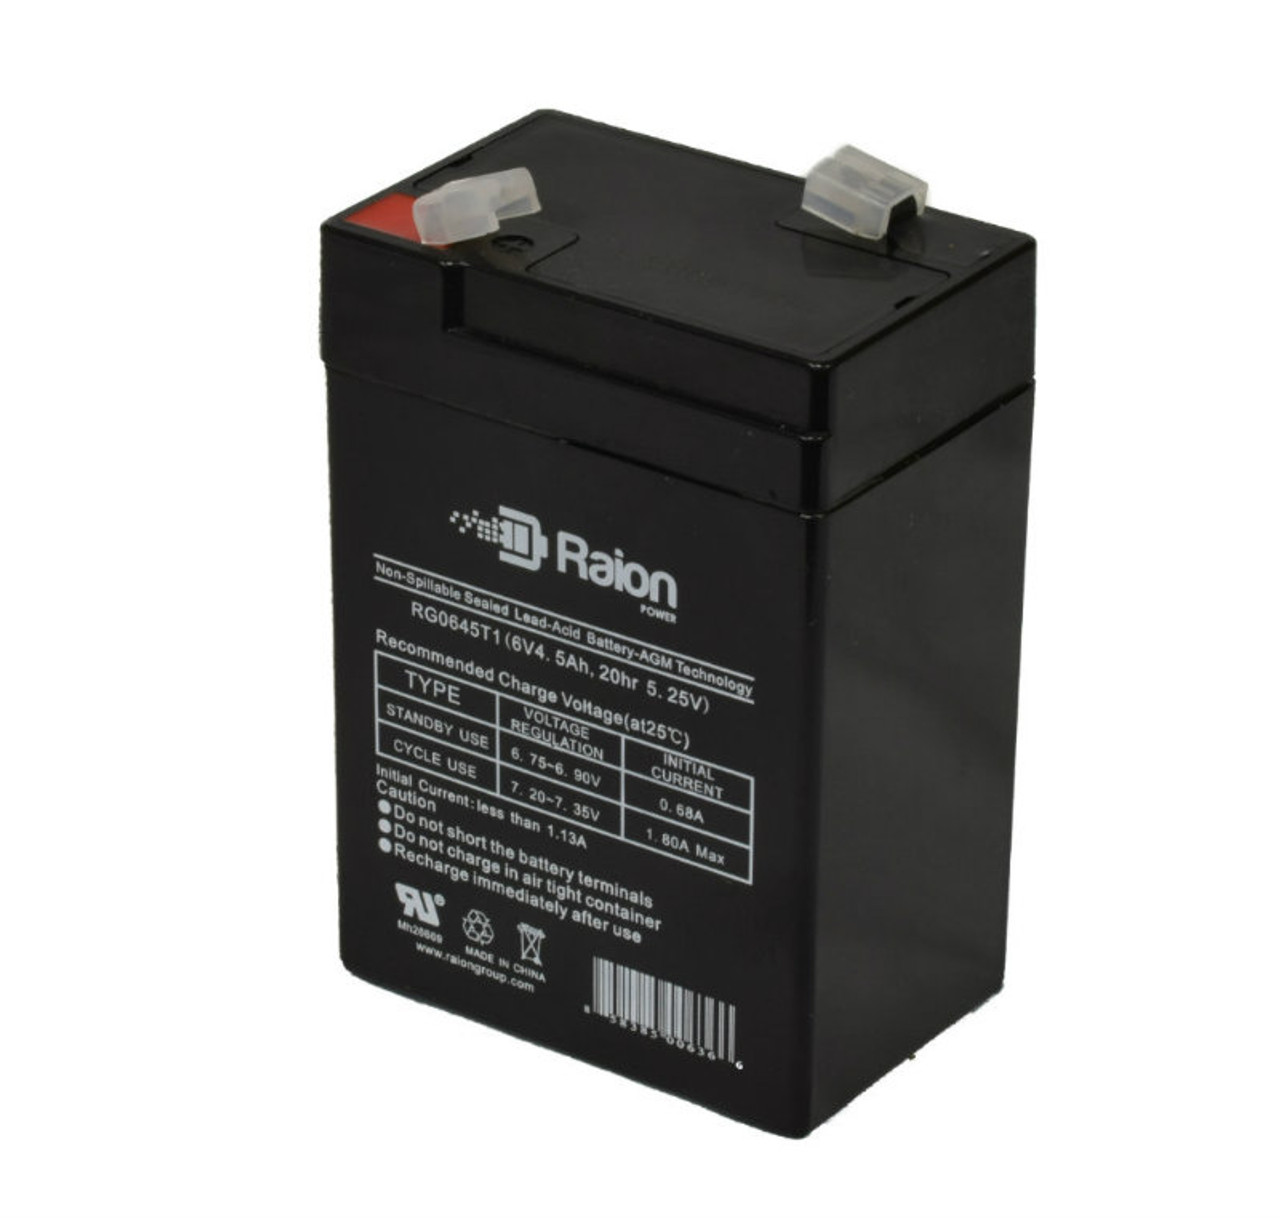 Raion Power RG0645T1 6V 4.5Ah Replacement Battery Cartridge for Remco RM6-4R25